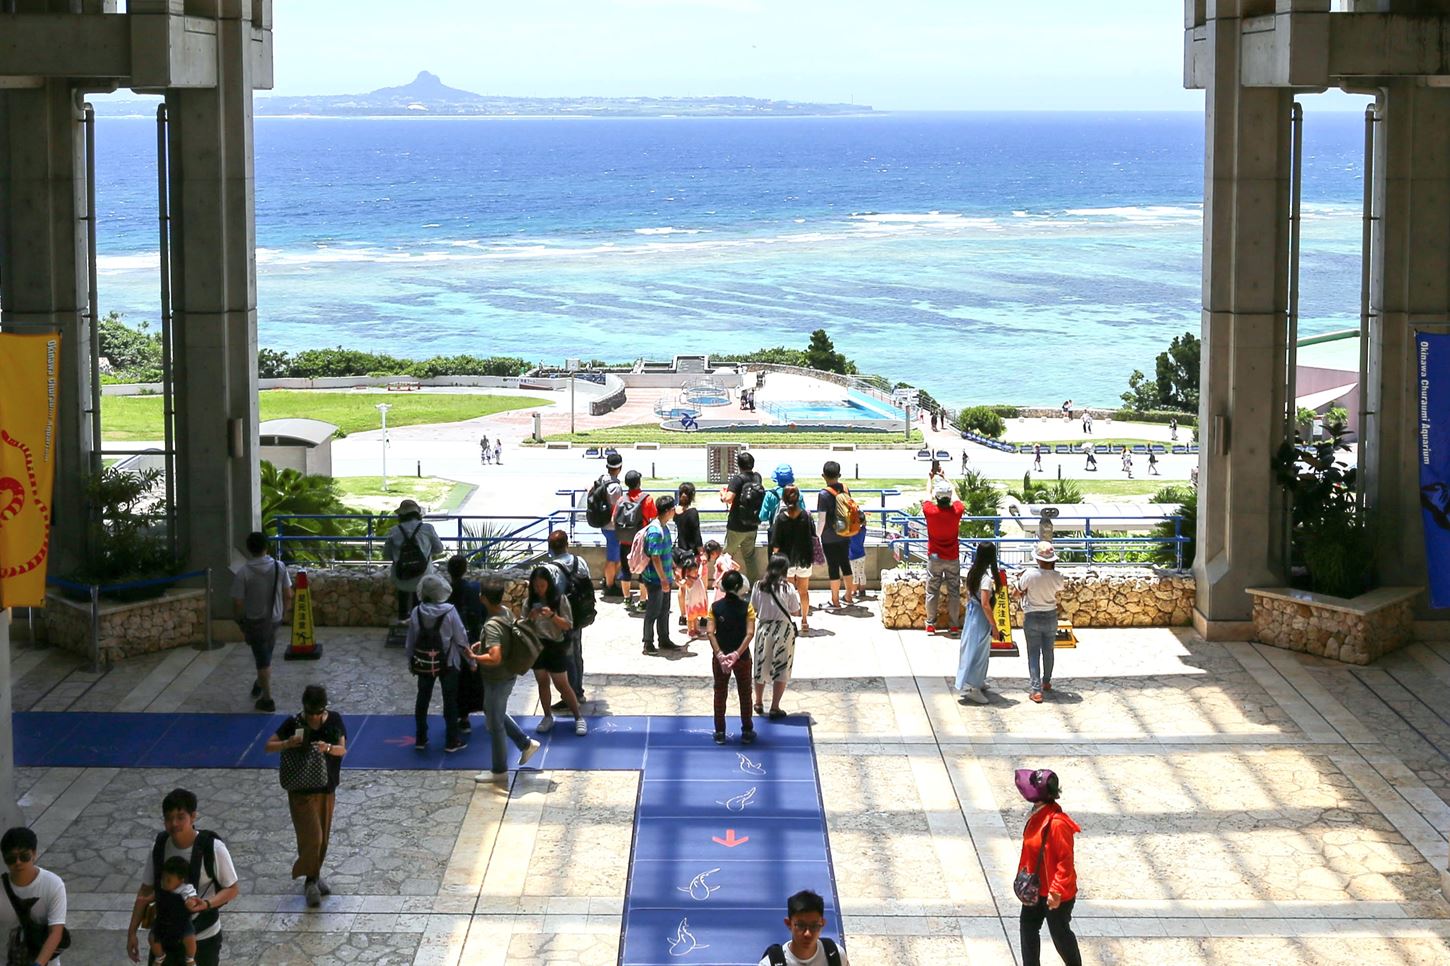 Sightseeing scenery that simply shows the weather and clothes in Okinawa in June2